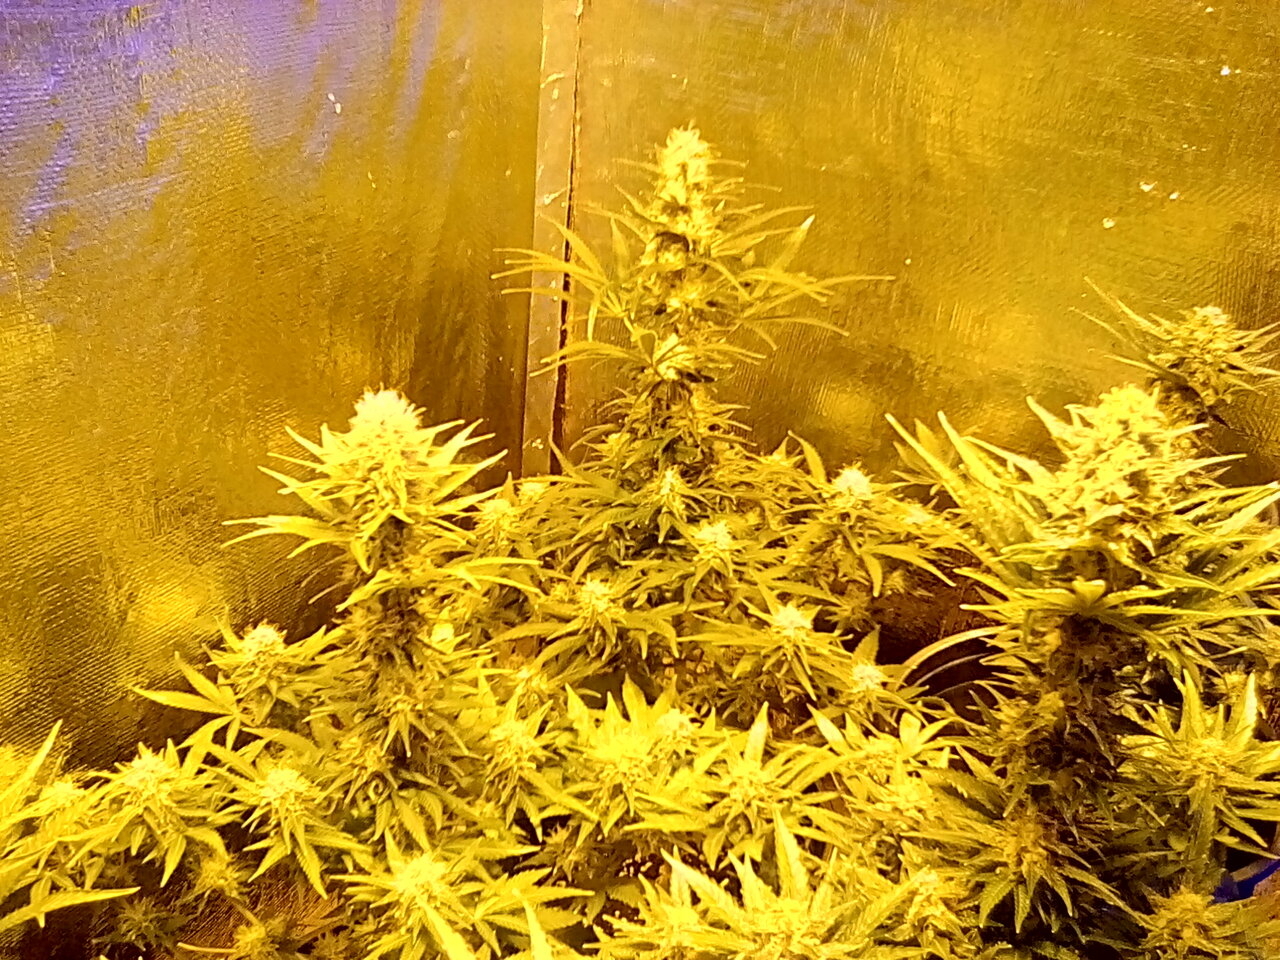 Day 49 of the flip.